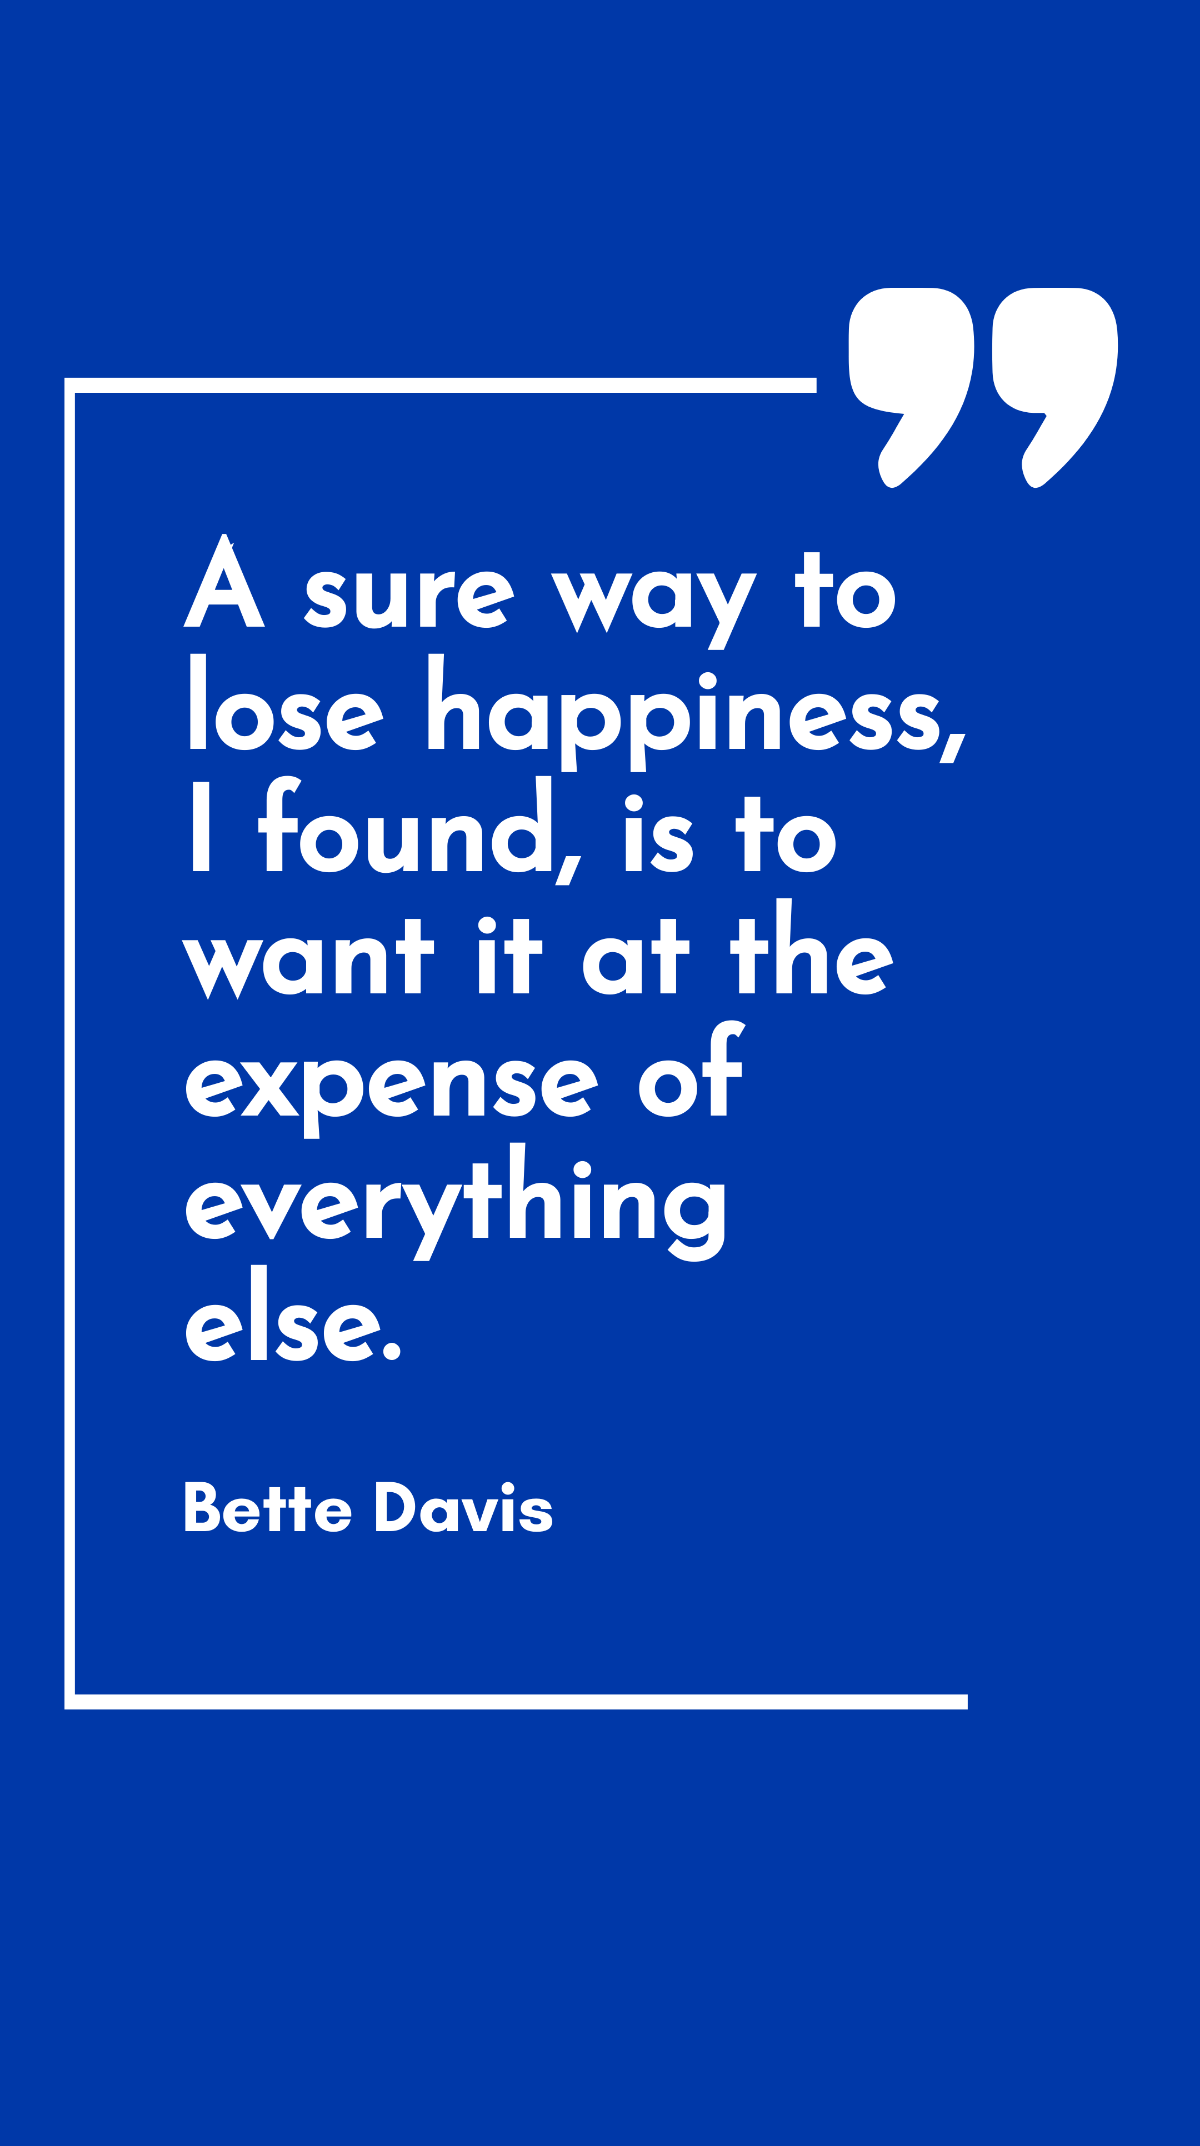 Bette Davis - A sure way to lose happiness, I found, is to want it at the expense of everything else. Template